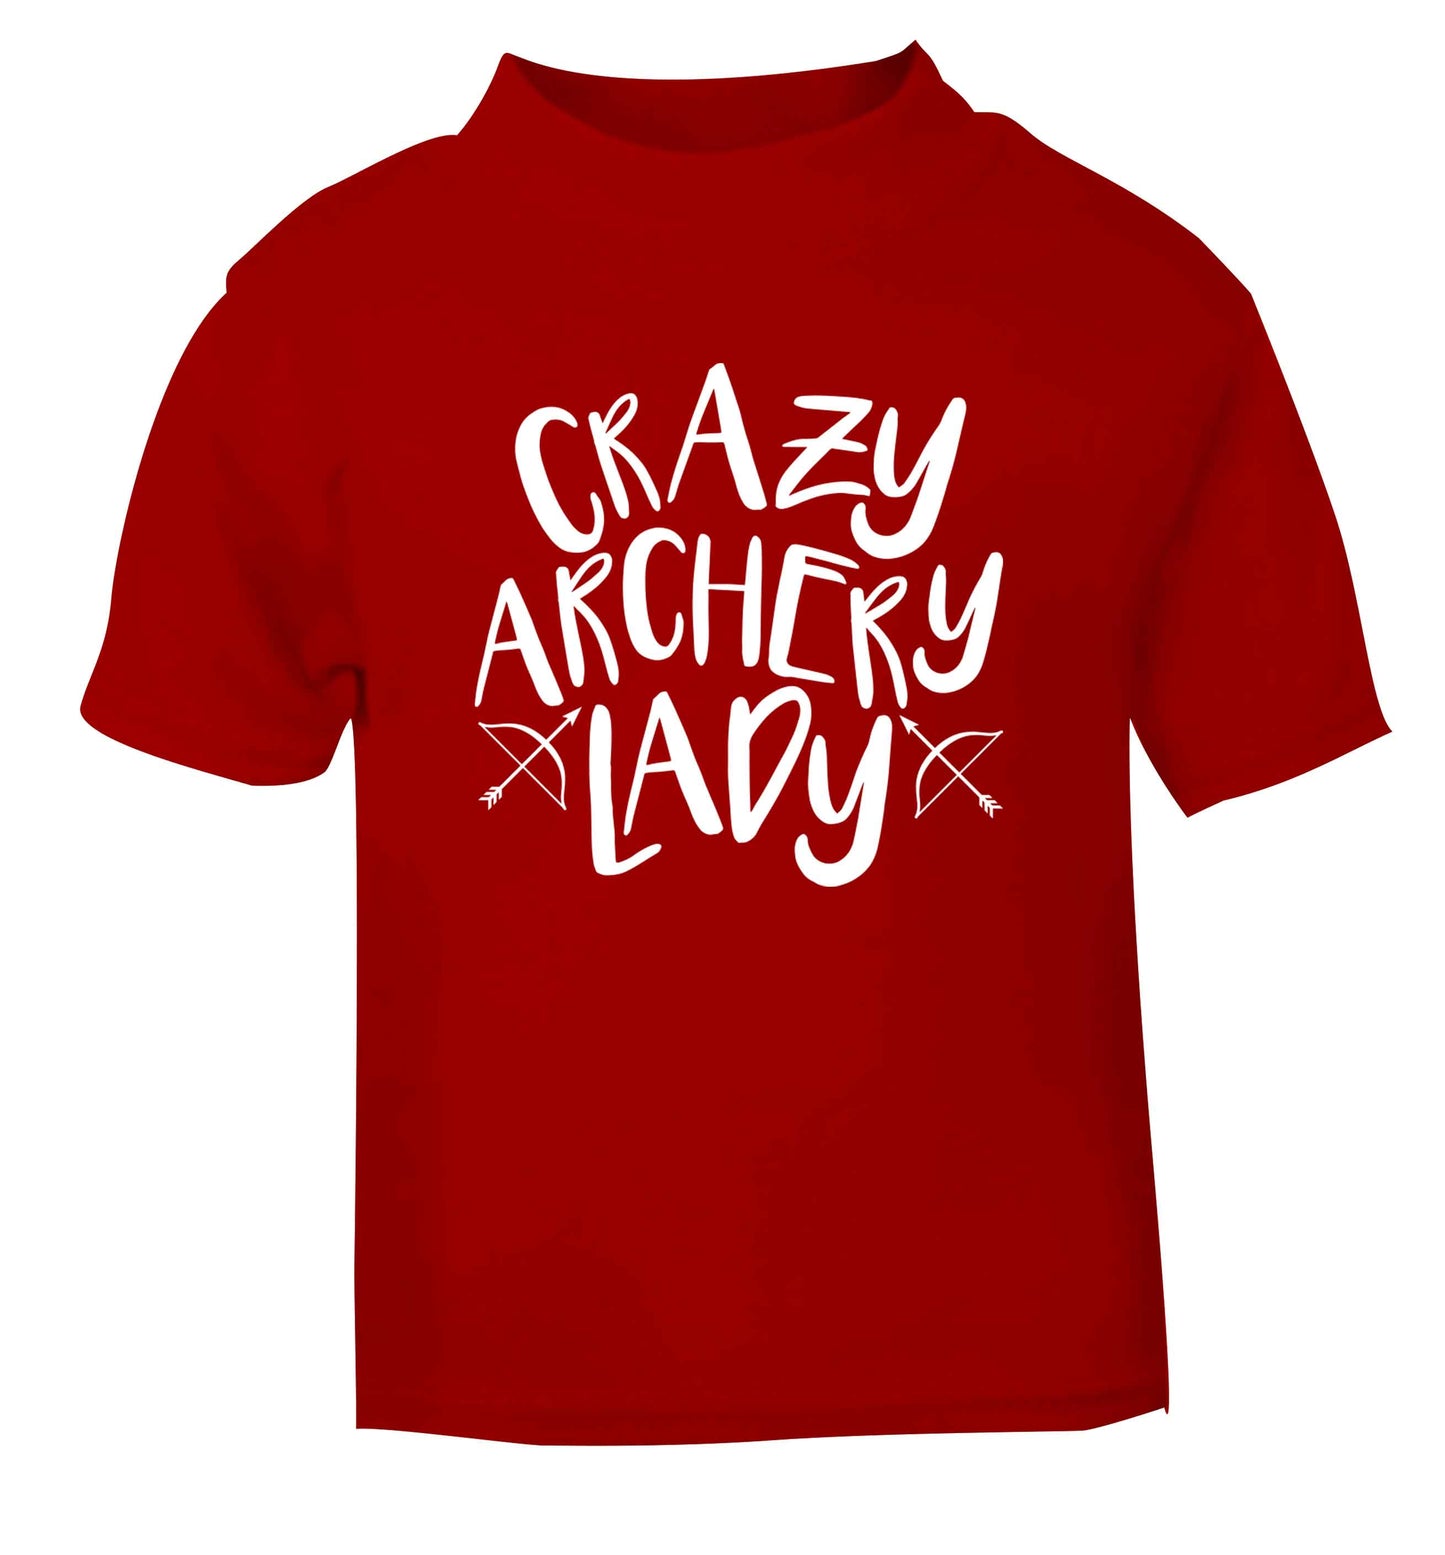 Crazy archery lady red Baby Toddler Tshirt 2 Years